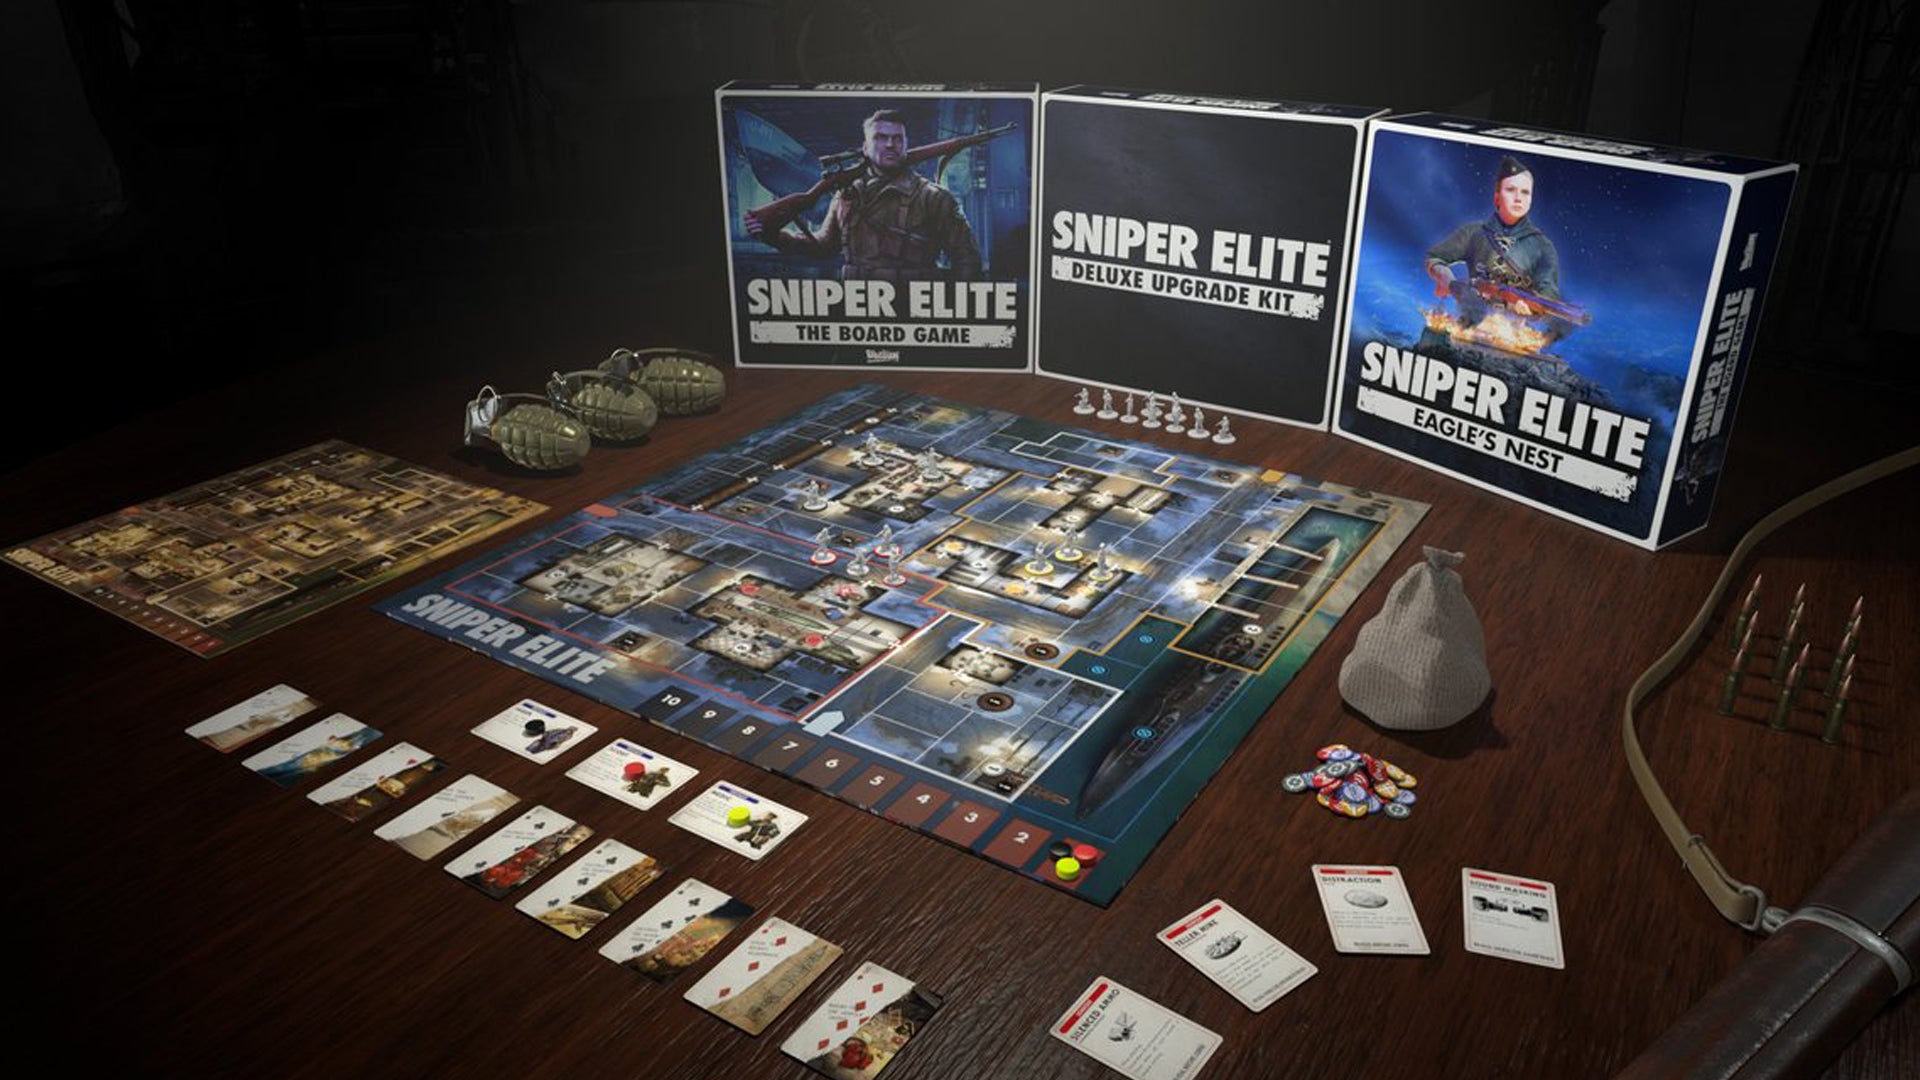 Sniper Elite: The Board Game layout